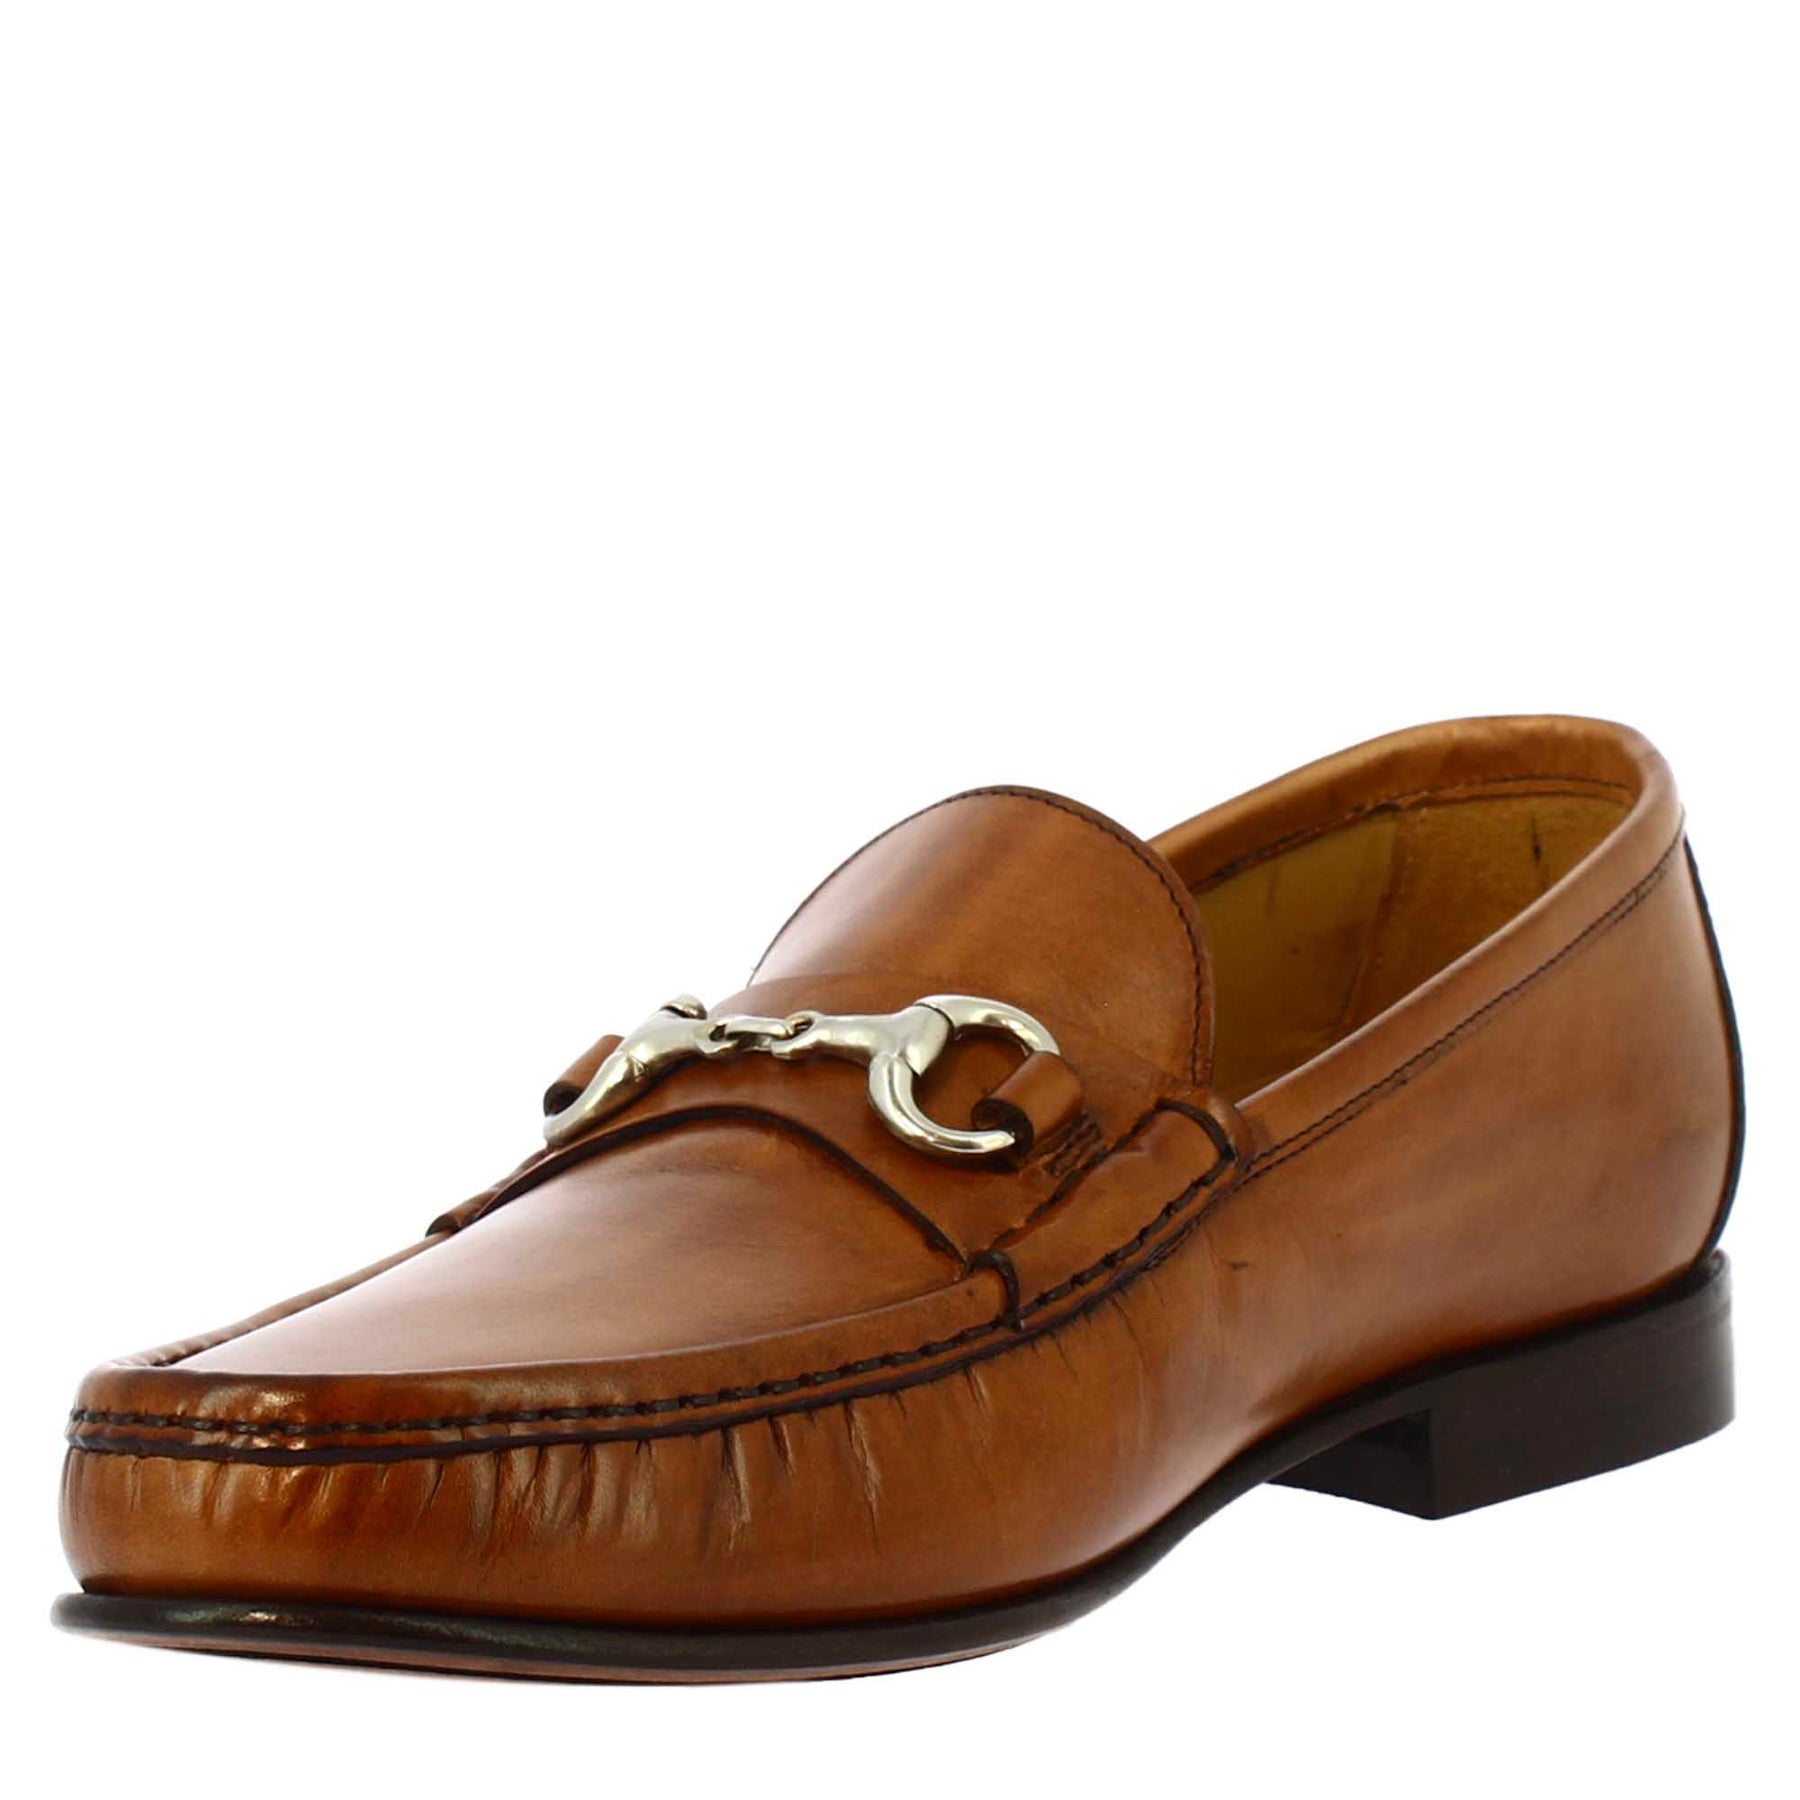 Handmade men's loafers in brown calf <tc>LEATHER</tc>